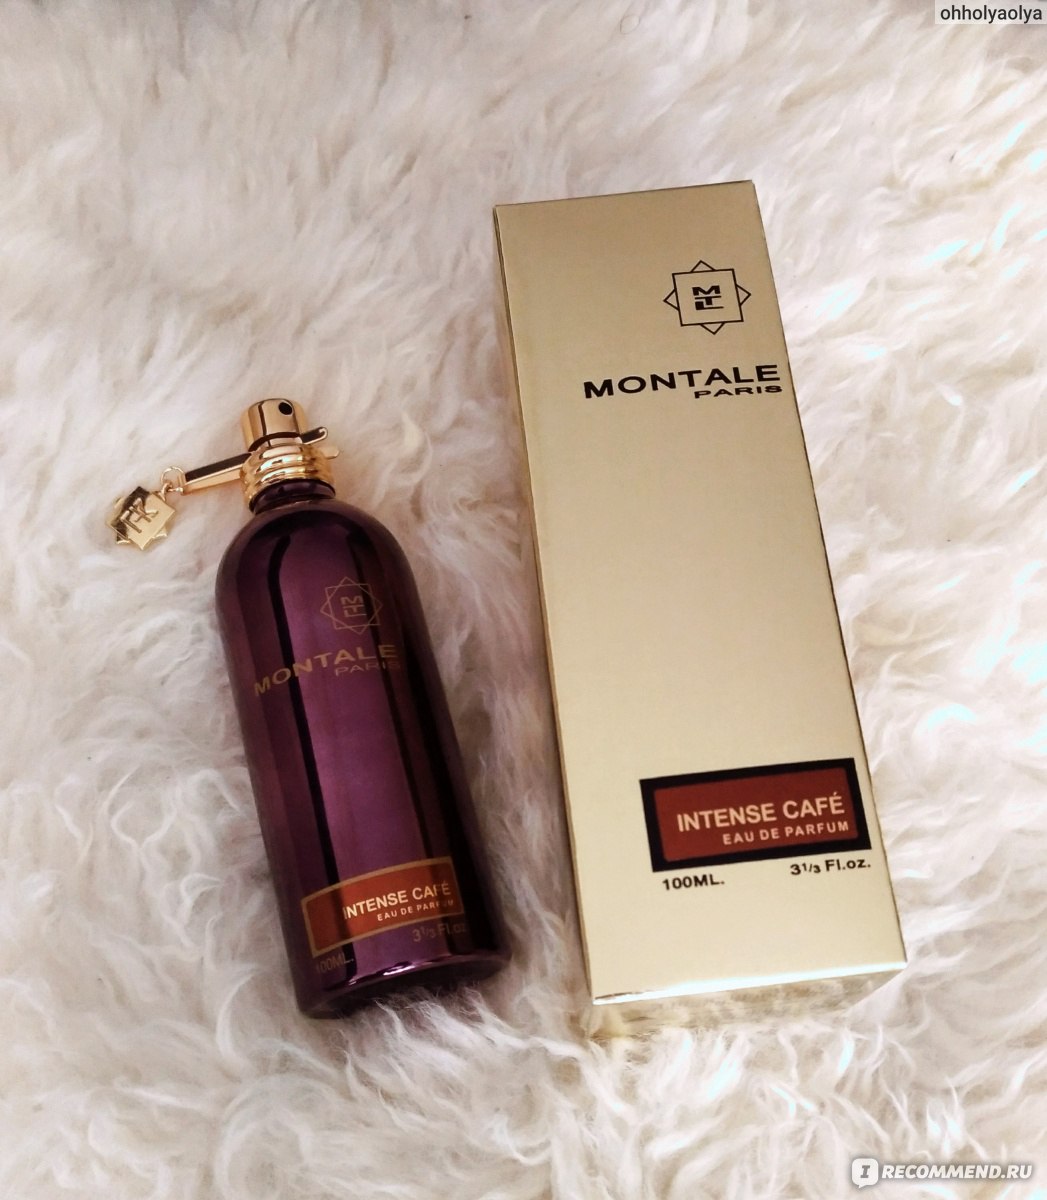 Ristretto montale. Intense Cafe Montale 100мл. Montale intense Cafe 100ml. Montale intense Cafe 50 мл. •Montale intense Cafe EDP 100ml.